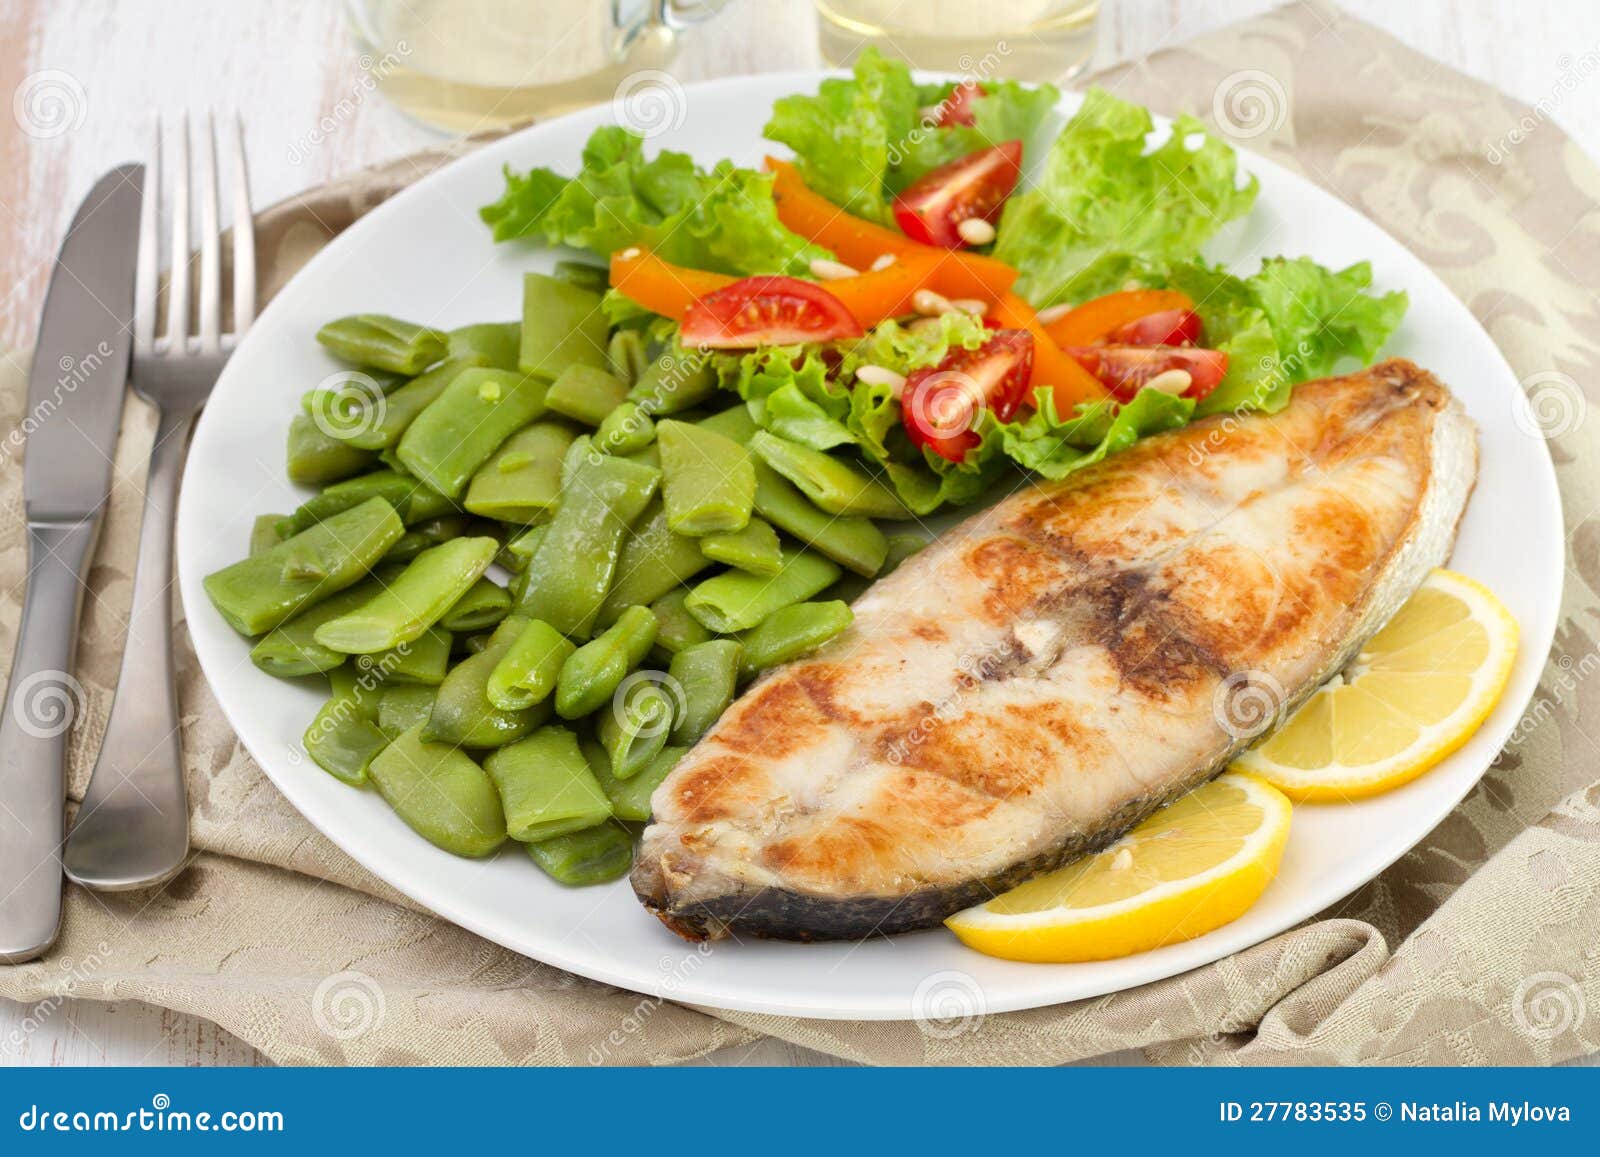 Fried Fish with Green Beans Stock Image - Image of meal, white: 27783535